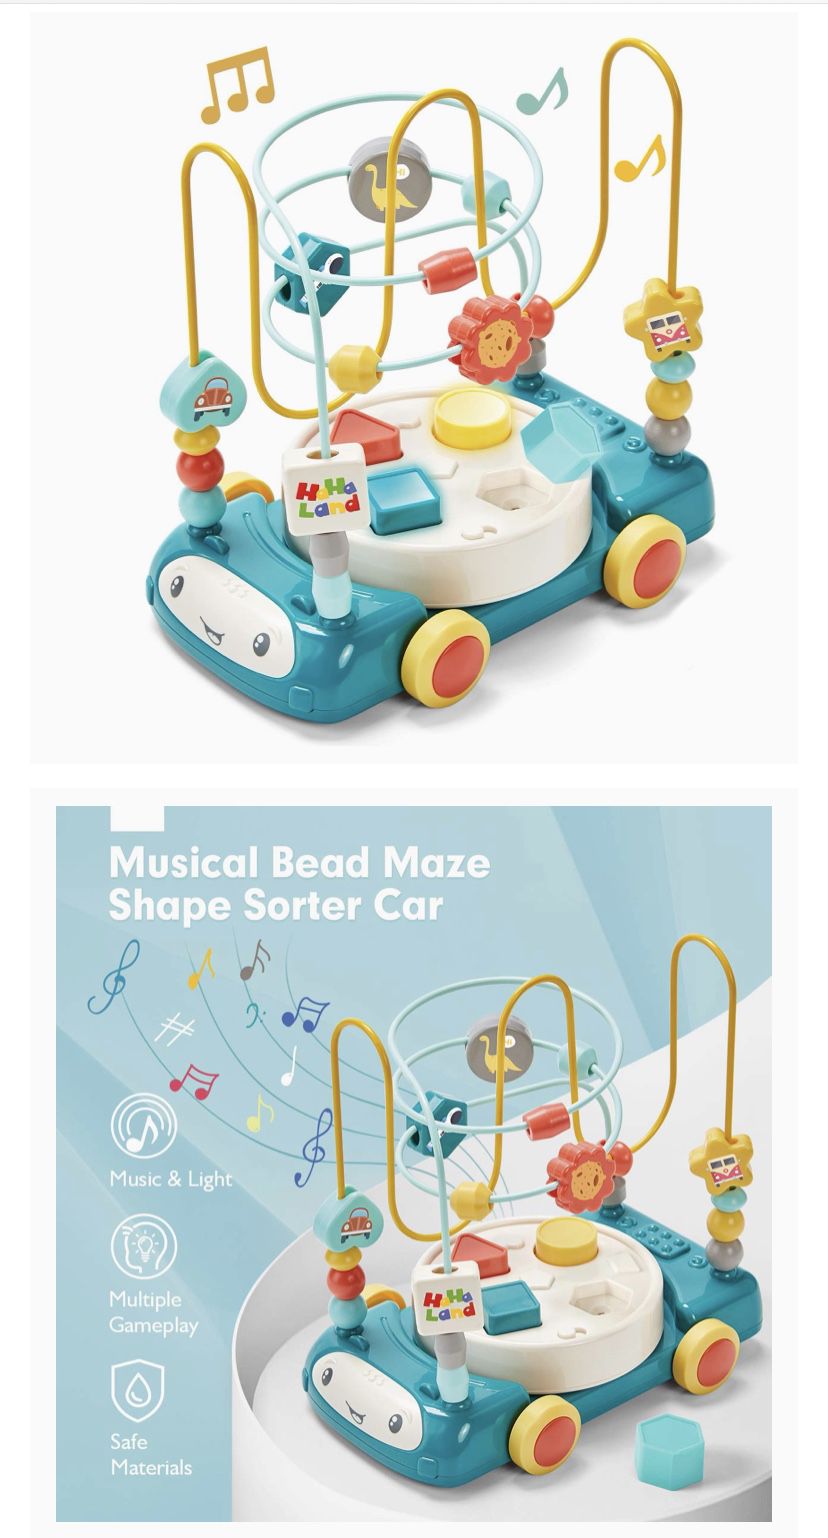 Bead Maze Shape Sorter Music Light Baby Toys 6 to 12-18 Months Baby Einstein Toddler Boy Girl Toys Age 1-2 Kids Gifts Toys for 1 Year Old Boy Girl To